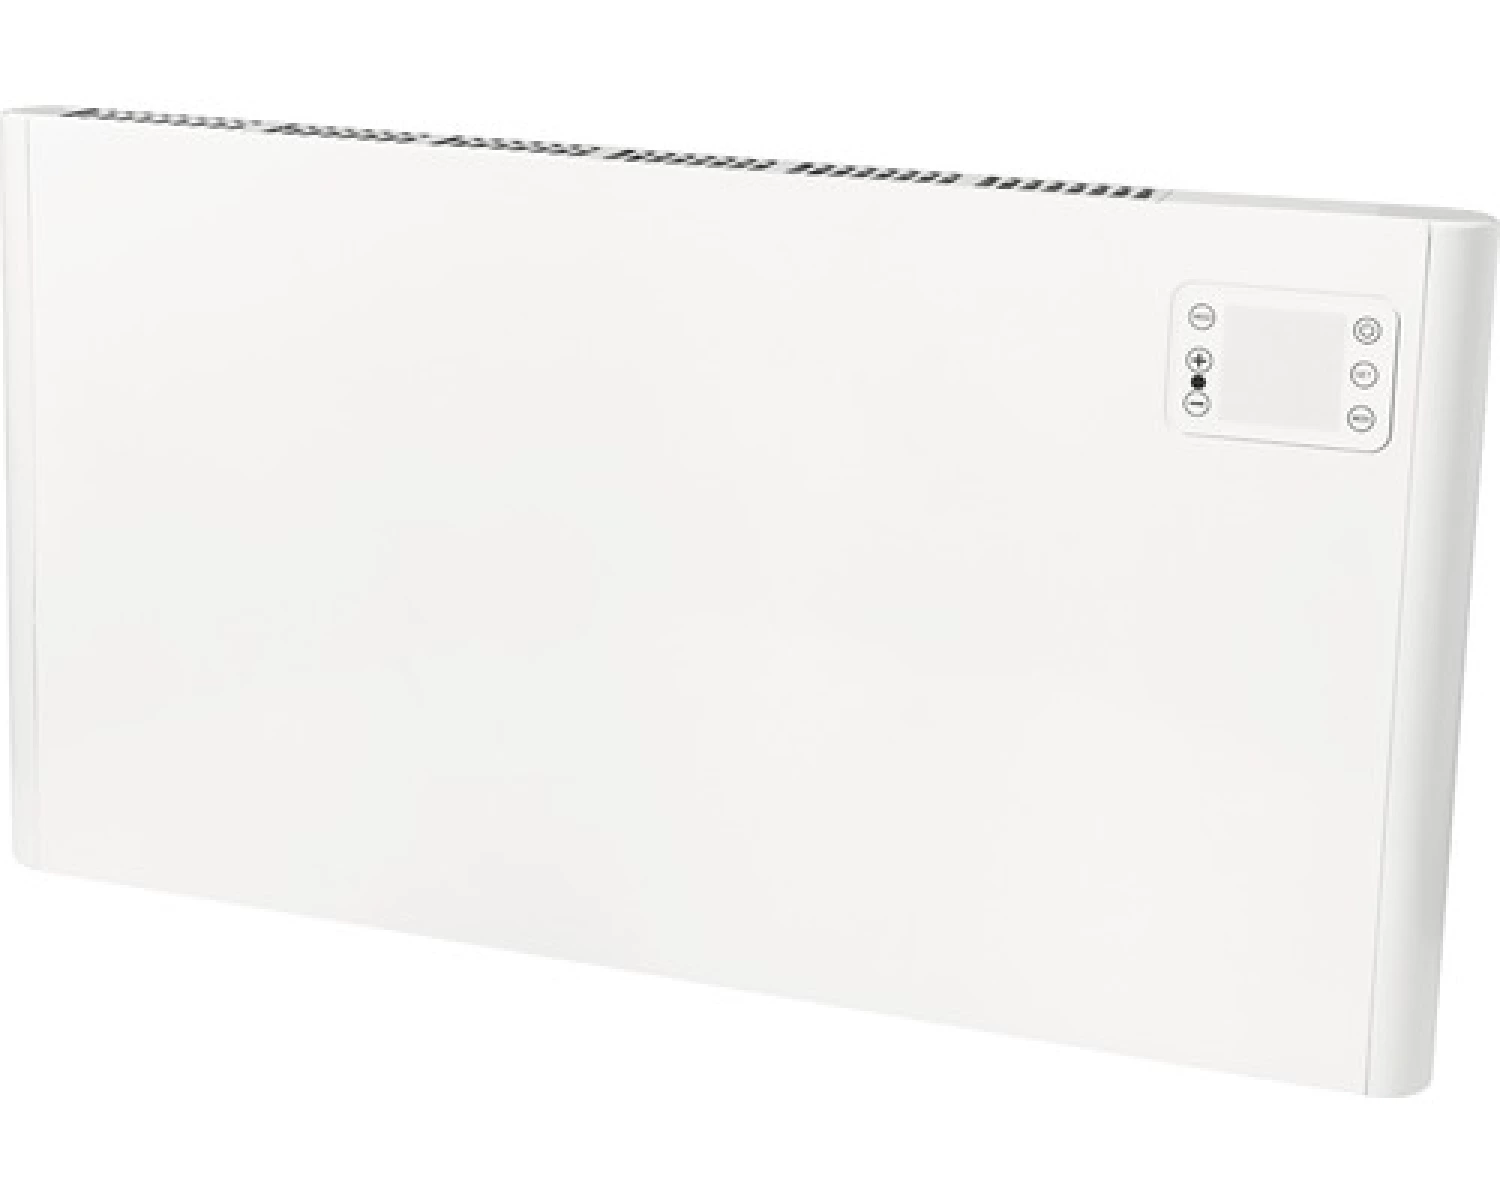 Eurom Alutherm 1000 WiFi Convectorkachel - 1000W - 40m3-image